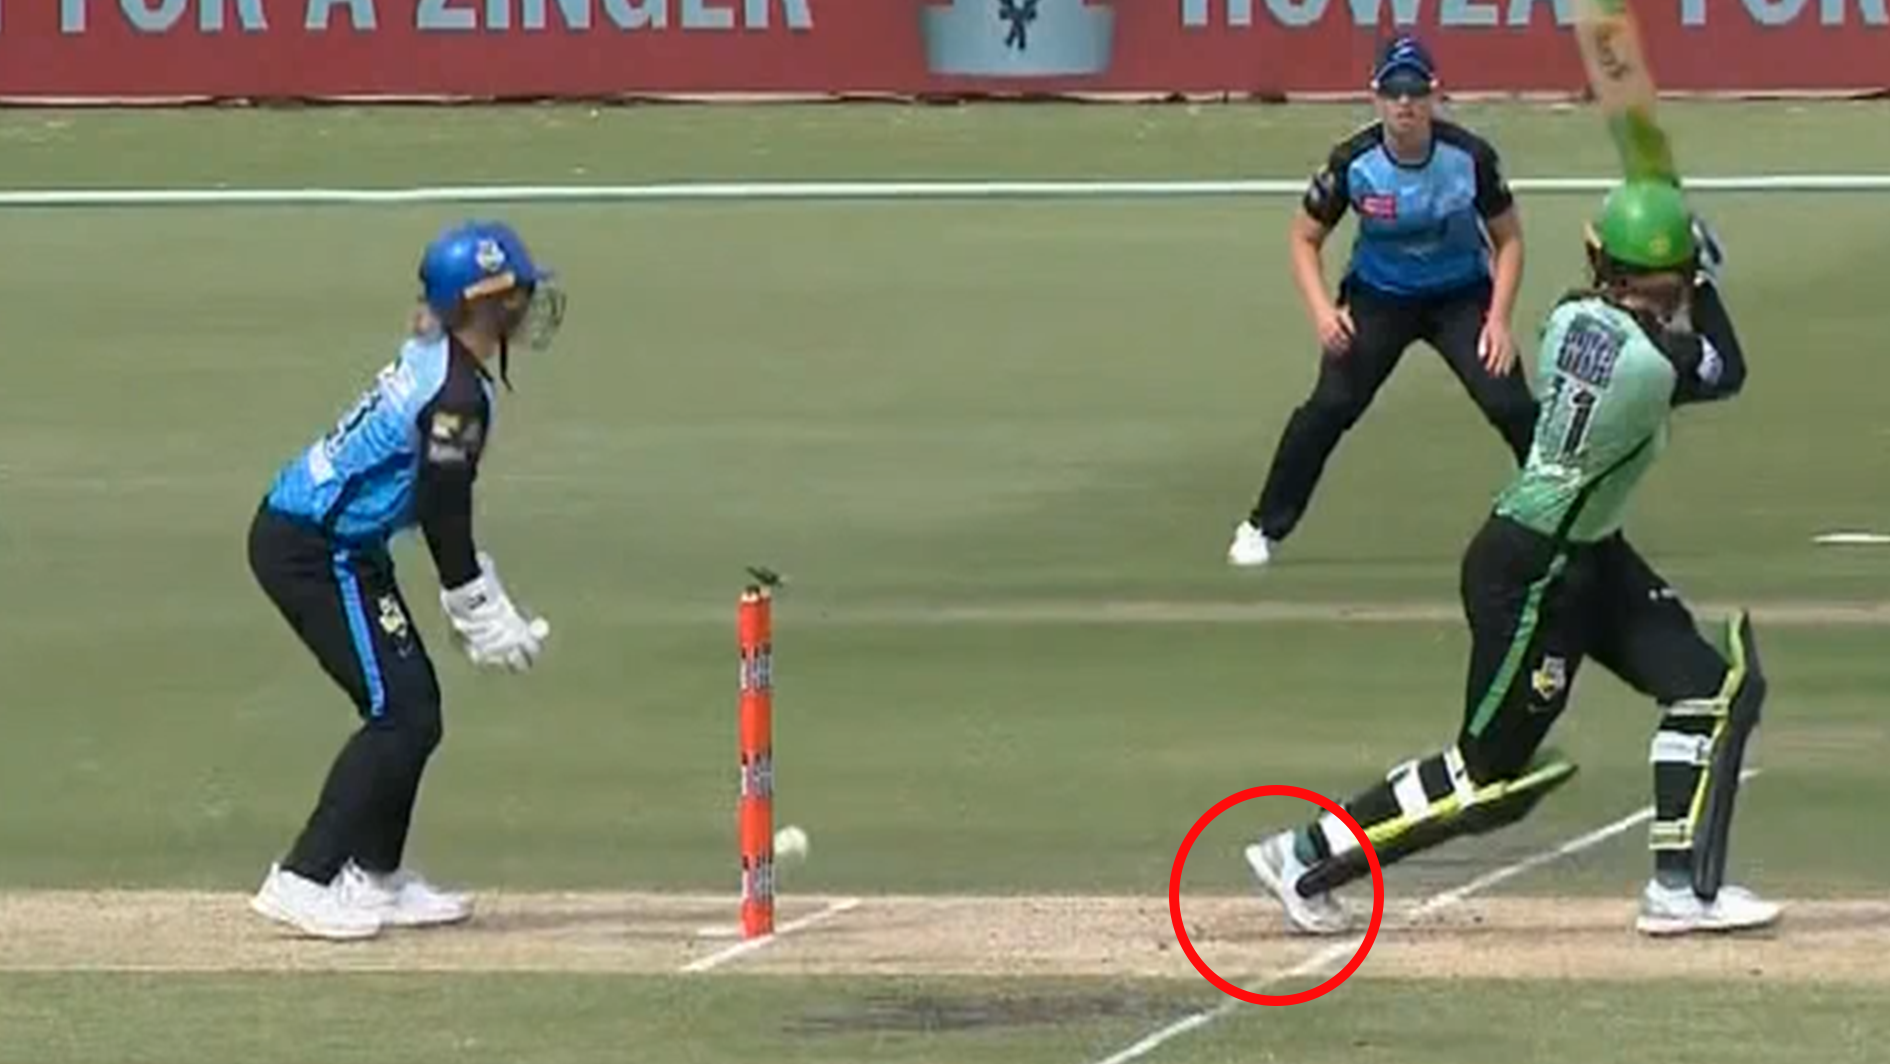 Rhys McKenna was wrongly given out after a delivery ricocheted off the wicketkeeper&#x27;s pads and into the stumps, with no third umpire to review.